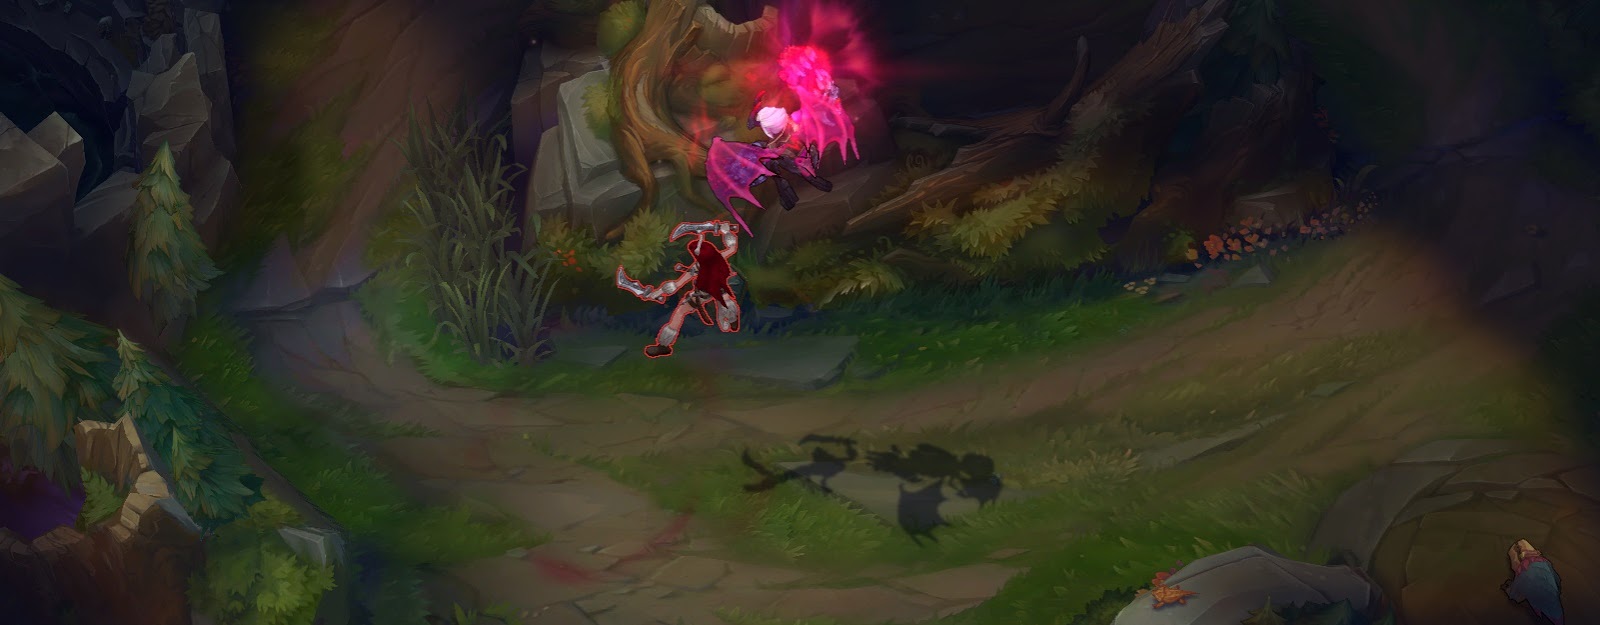 New League Of Legends Skin Makes Brand Look Like The Witch Doctor